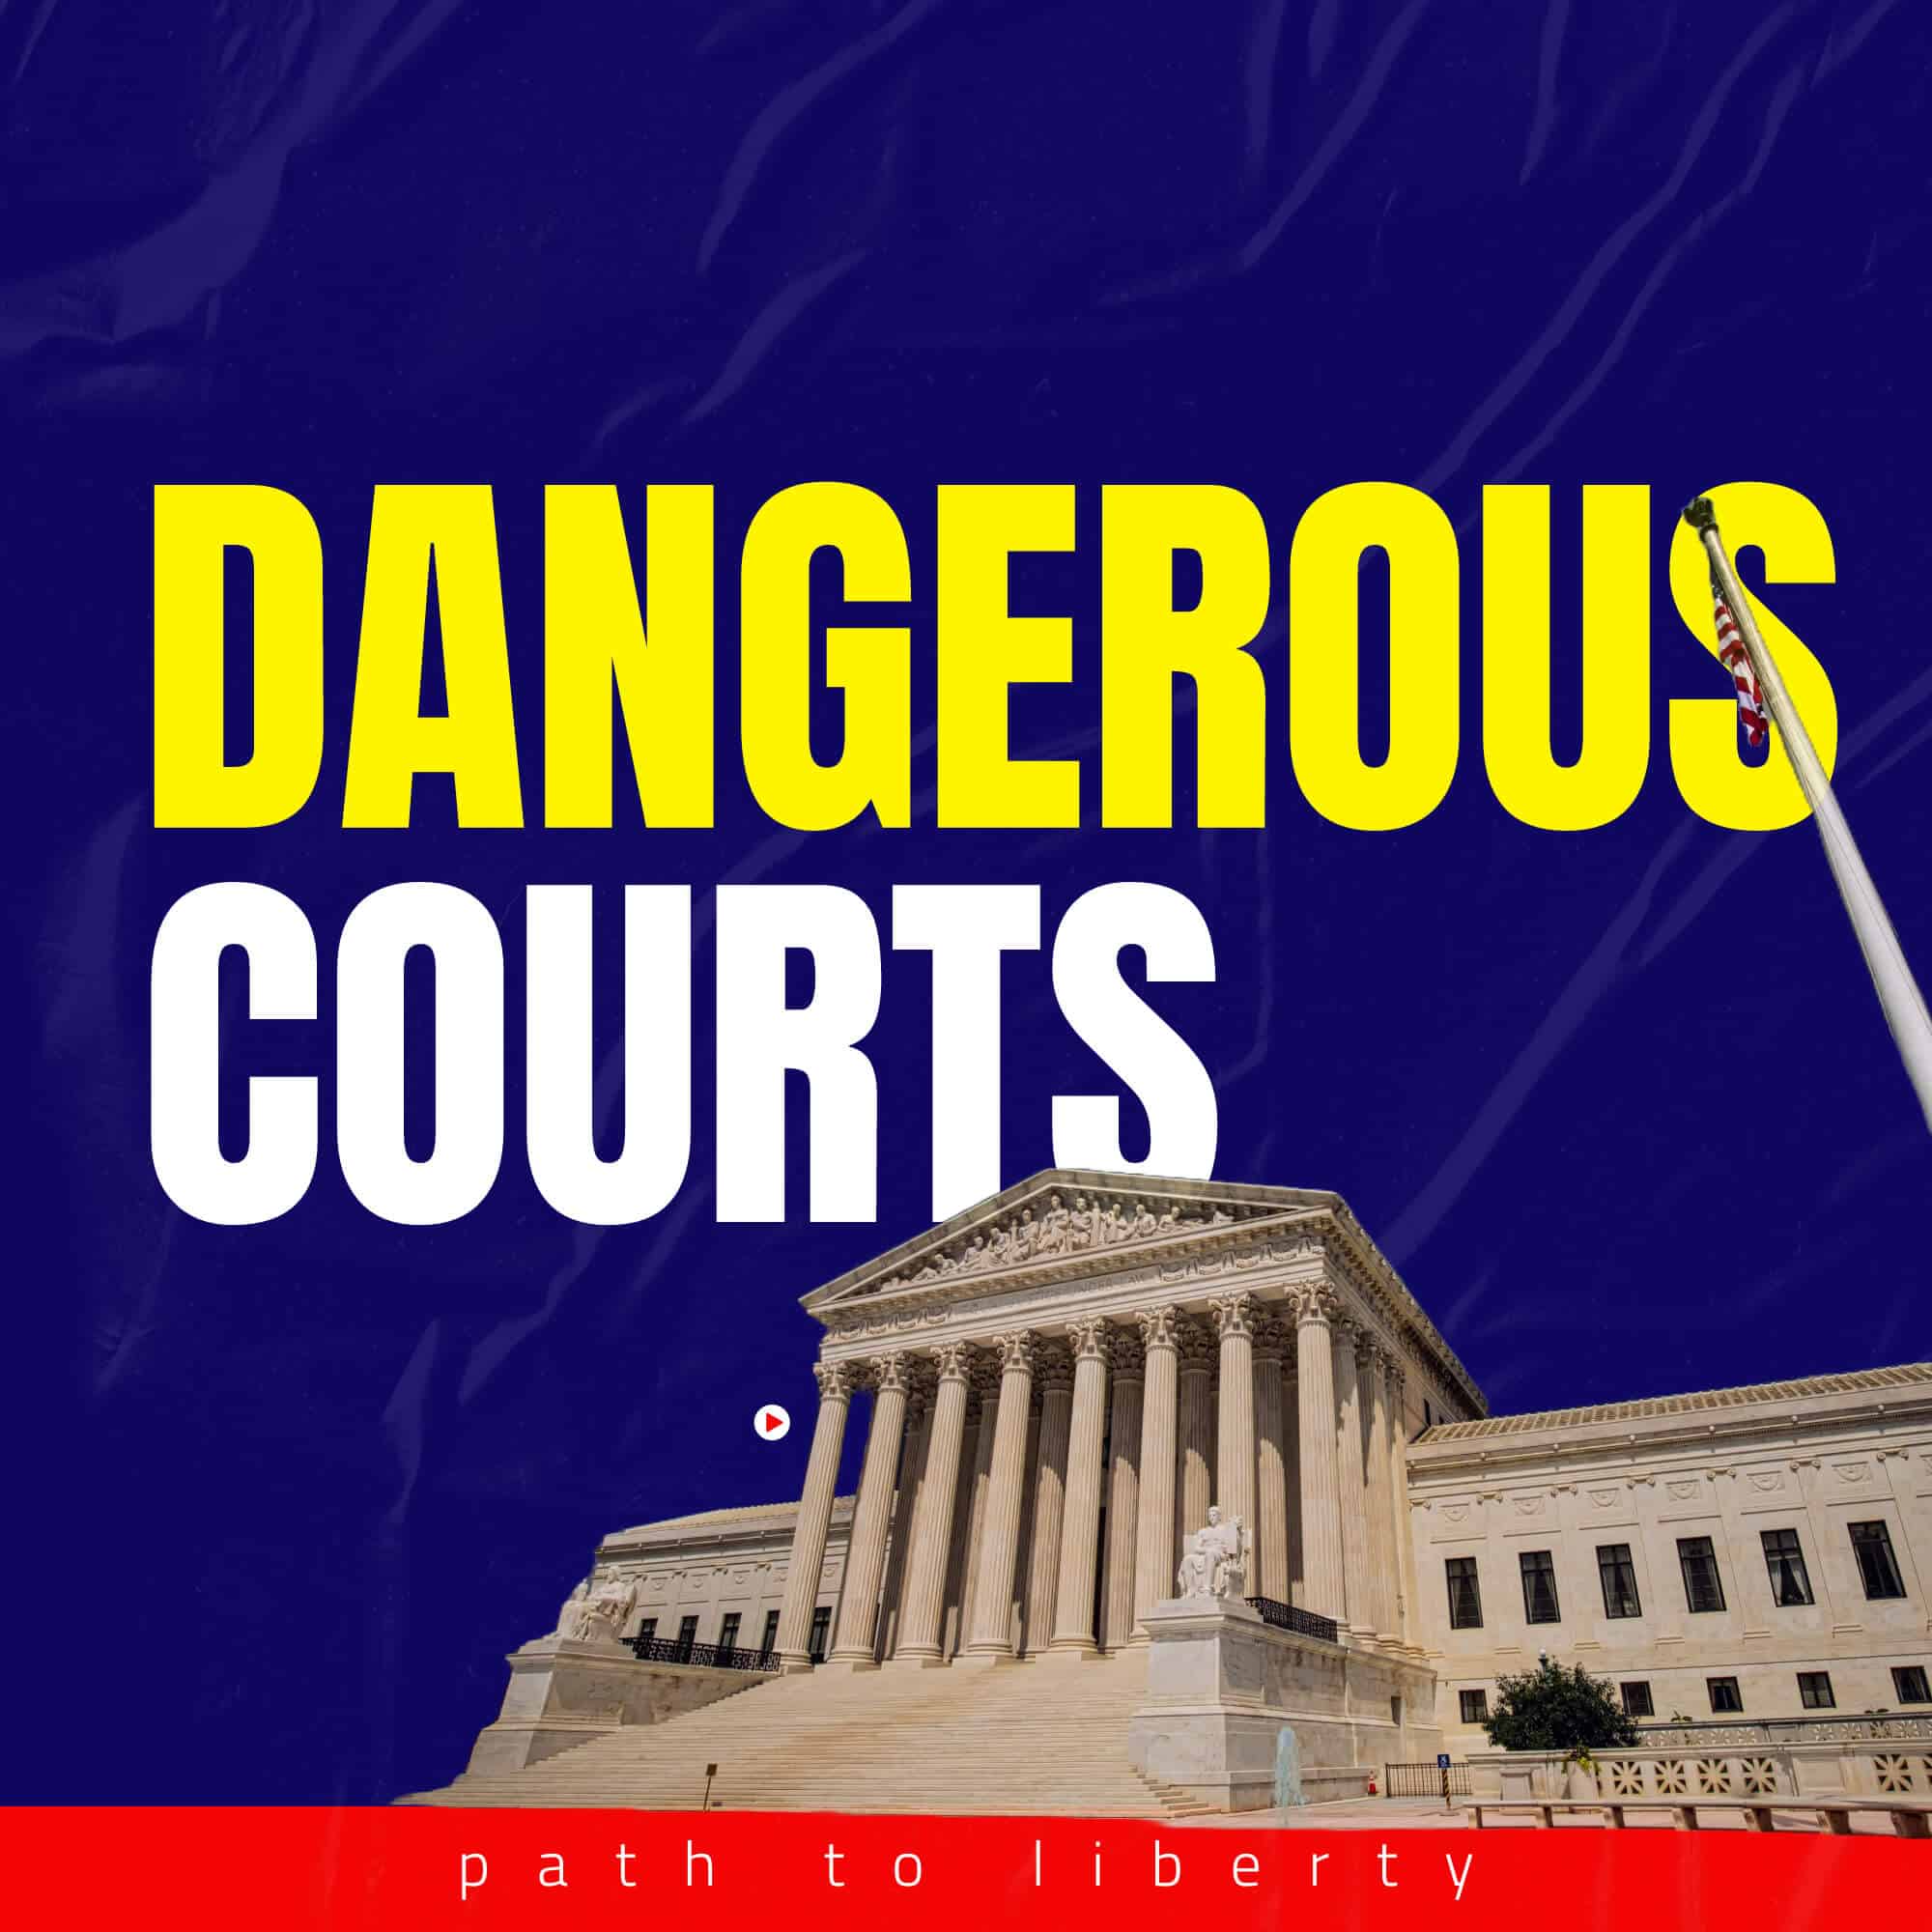 Federal Courts: Warnings from Mason and Jefferson